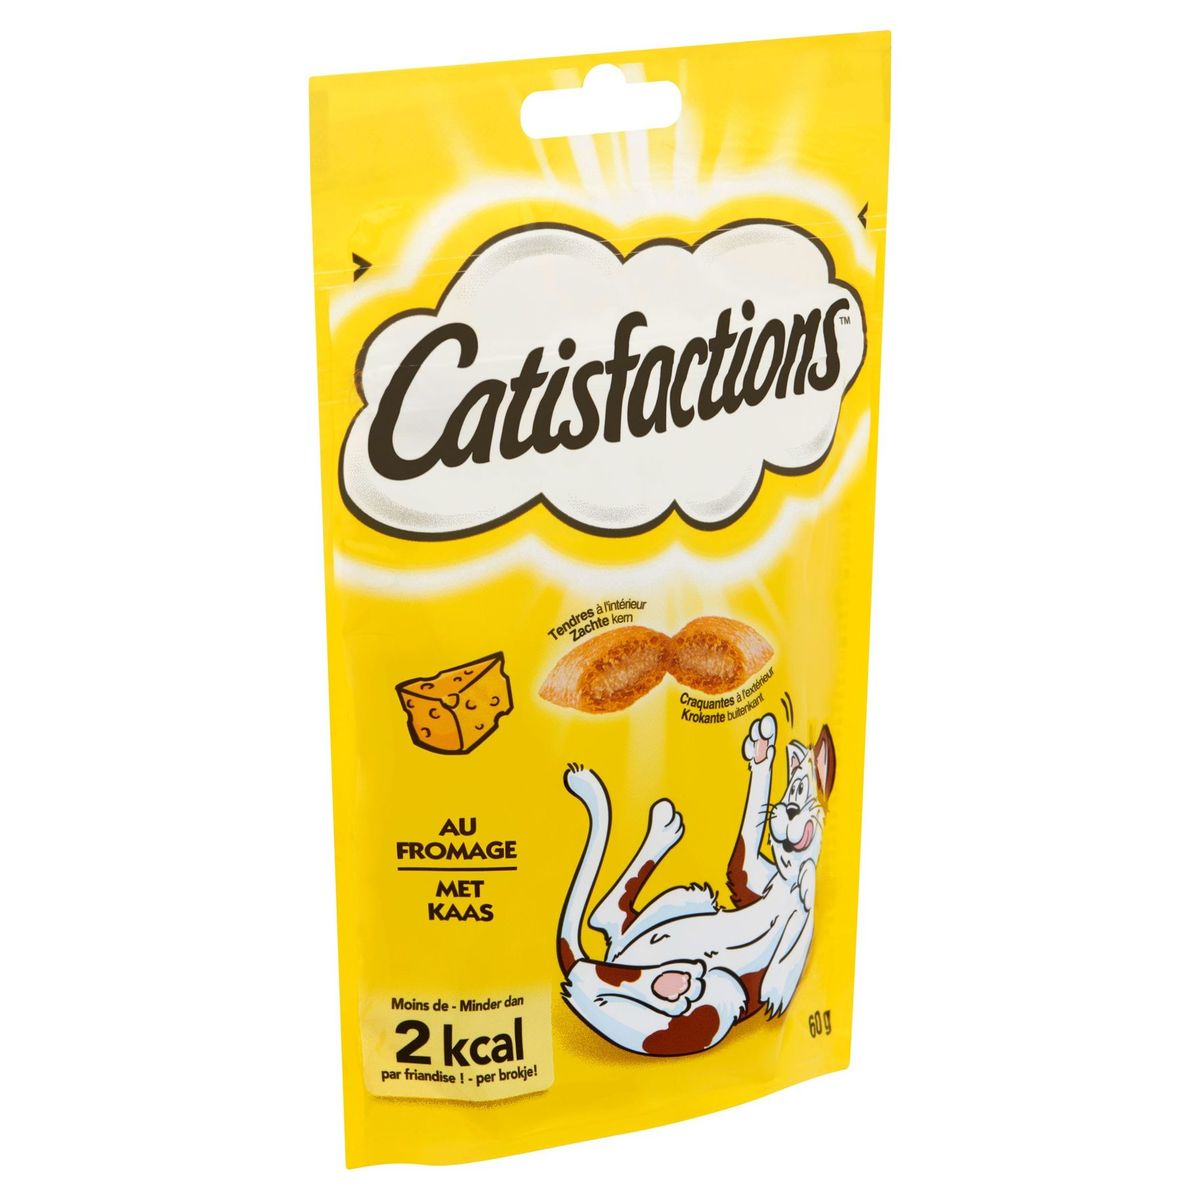 Catisfactions Snack Chat au Fromage 60 g